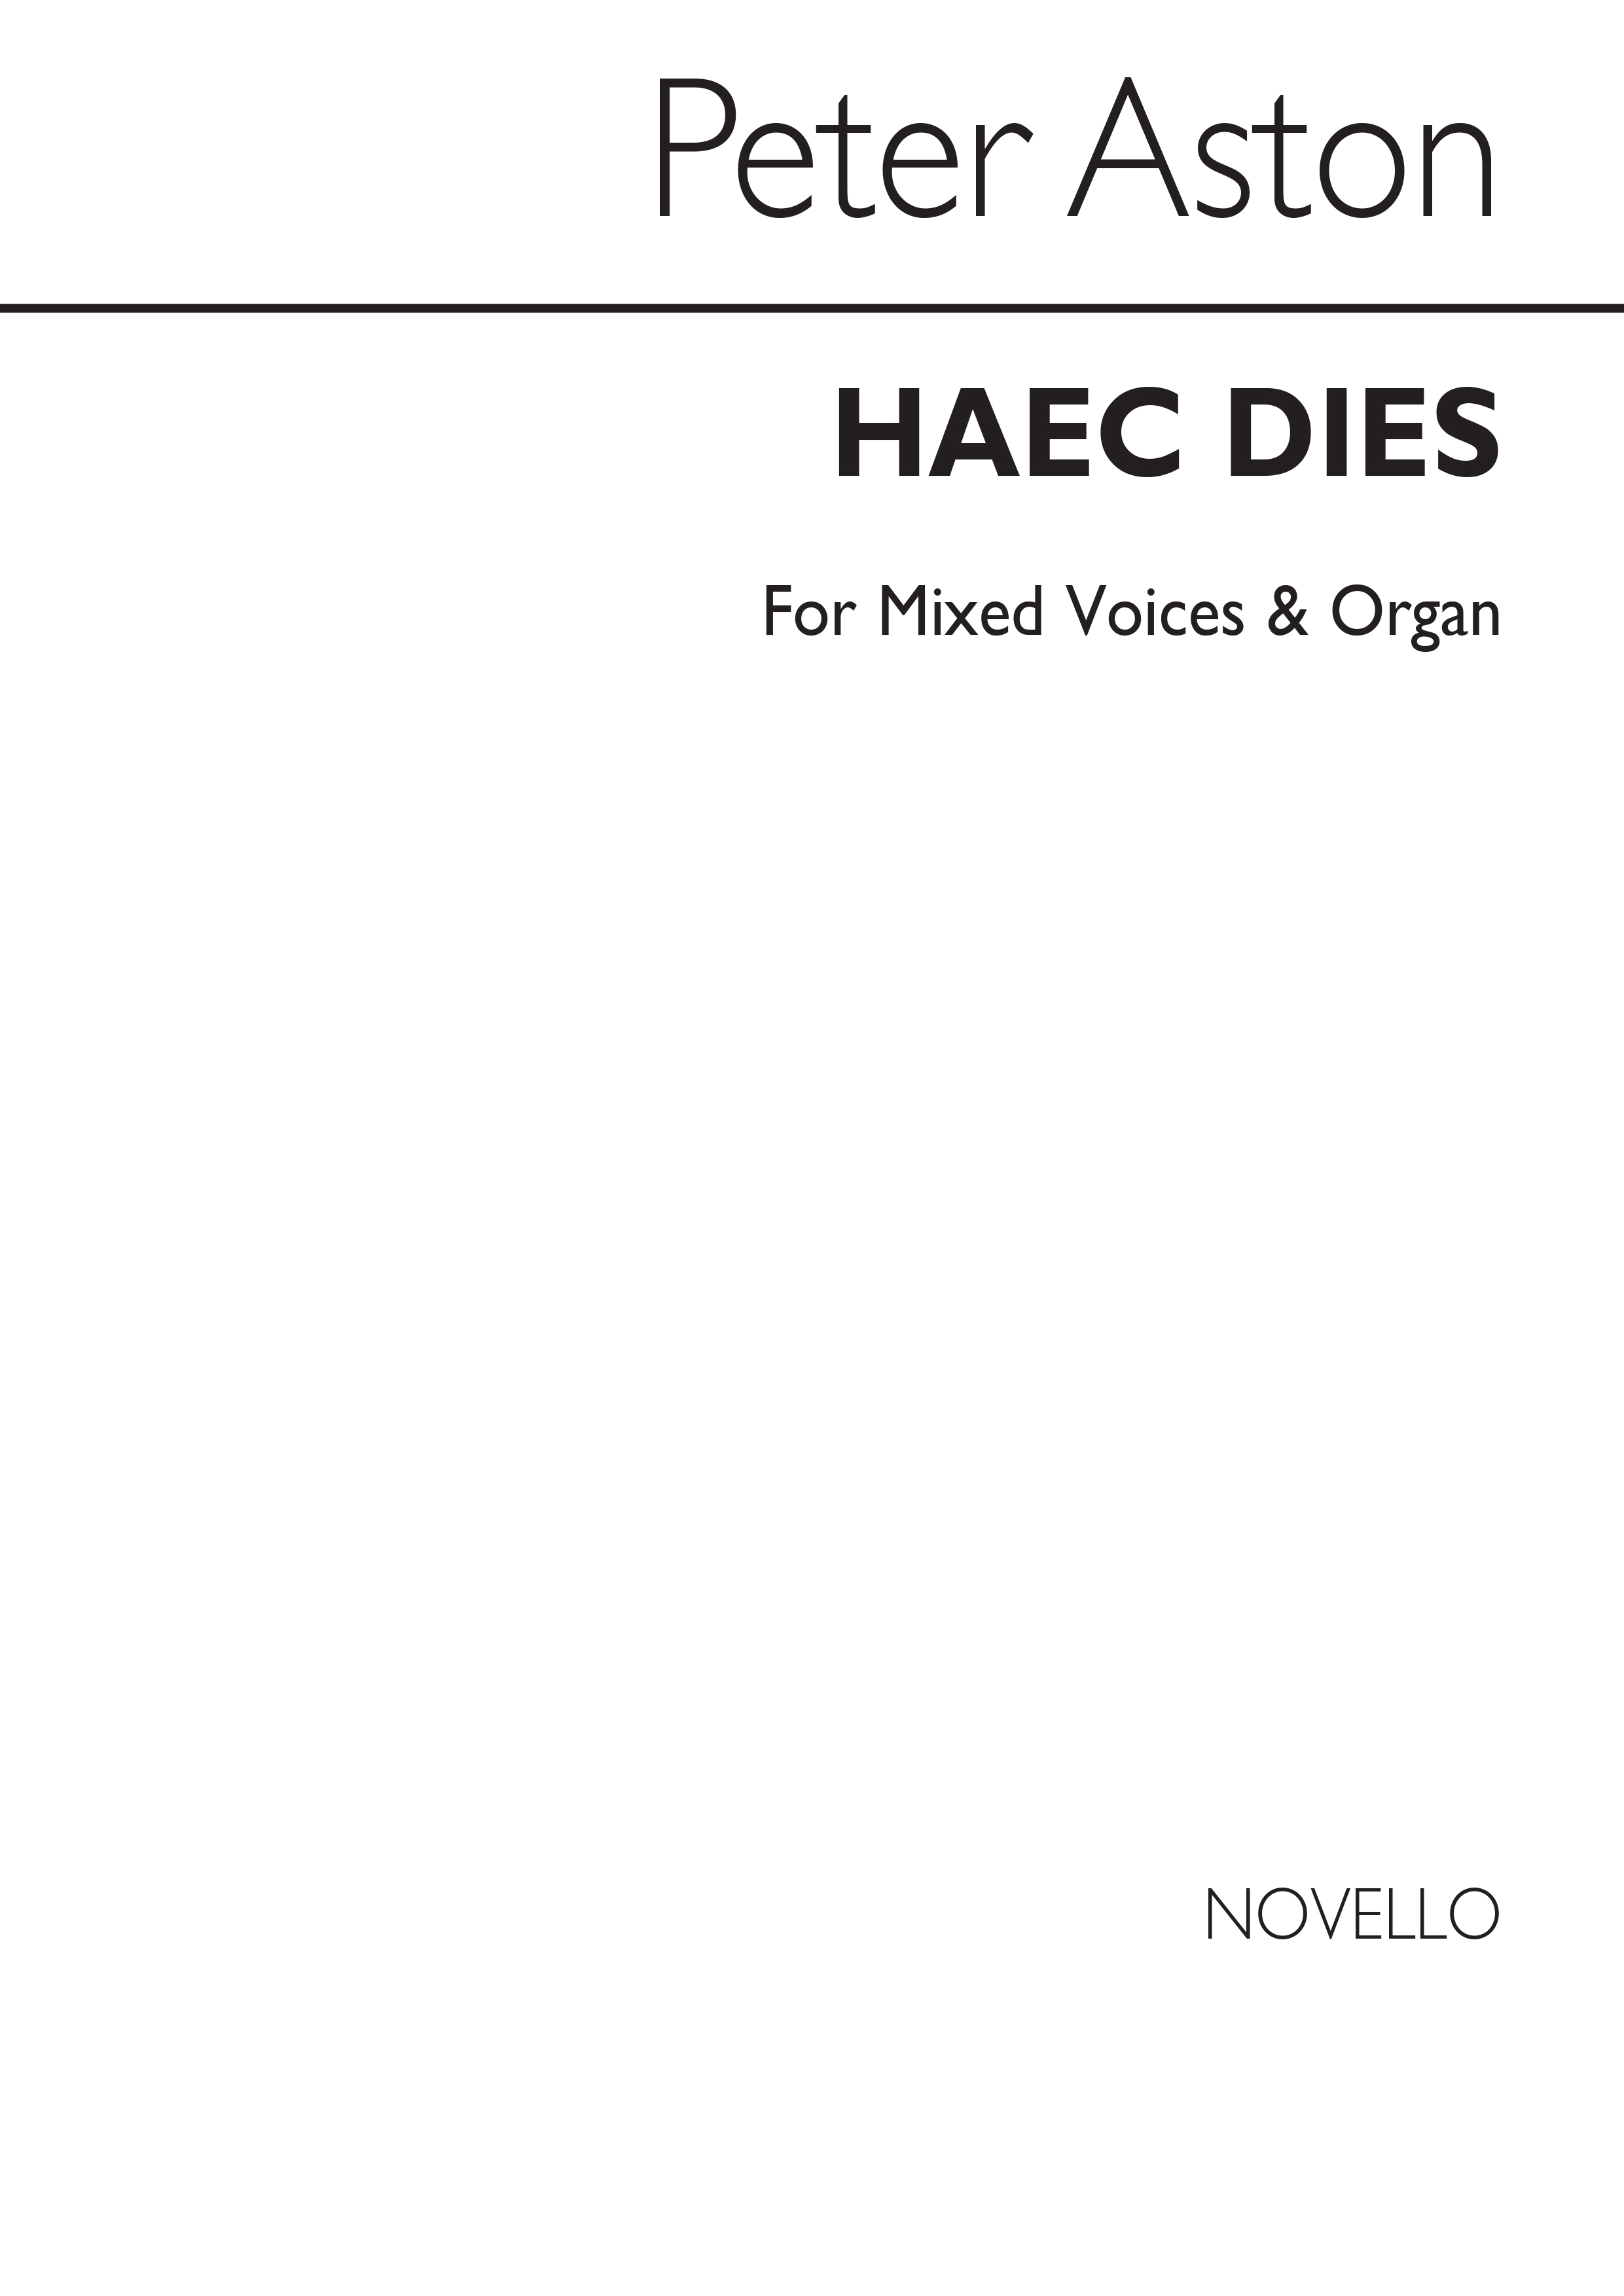 Peter Aston: Haec Dies for Mixed Voices and Organ